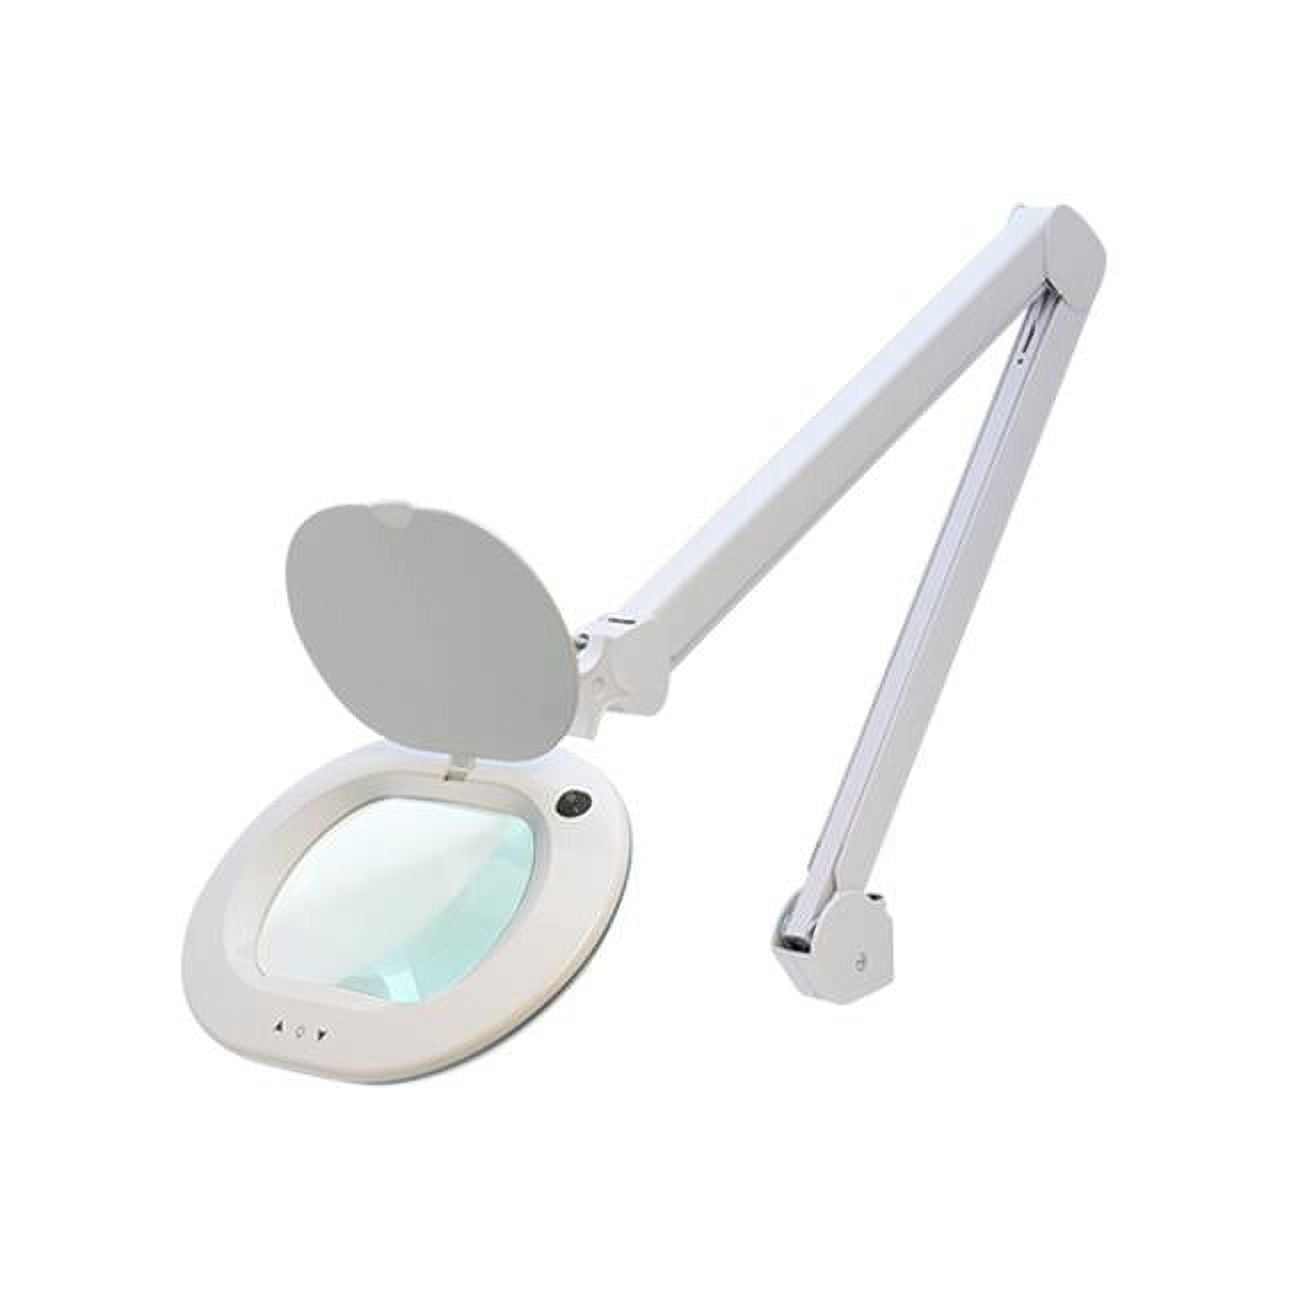 Picture of Aven 26505-MX5 Mighty Vue Slim 5 Diopter LED Magnifying Lamp